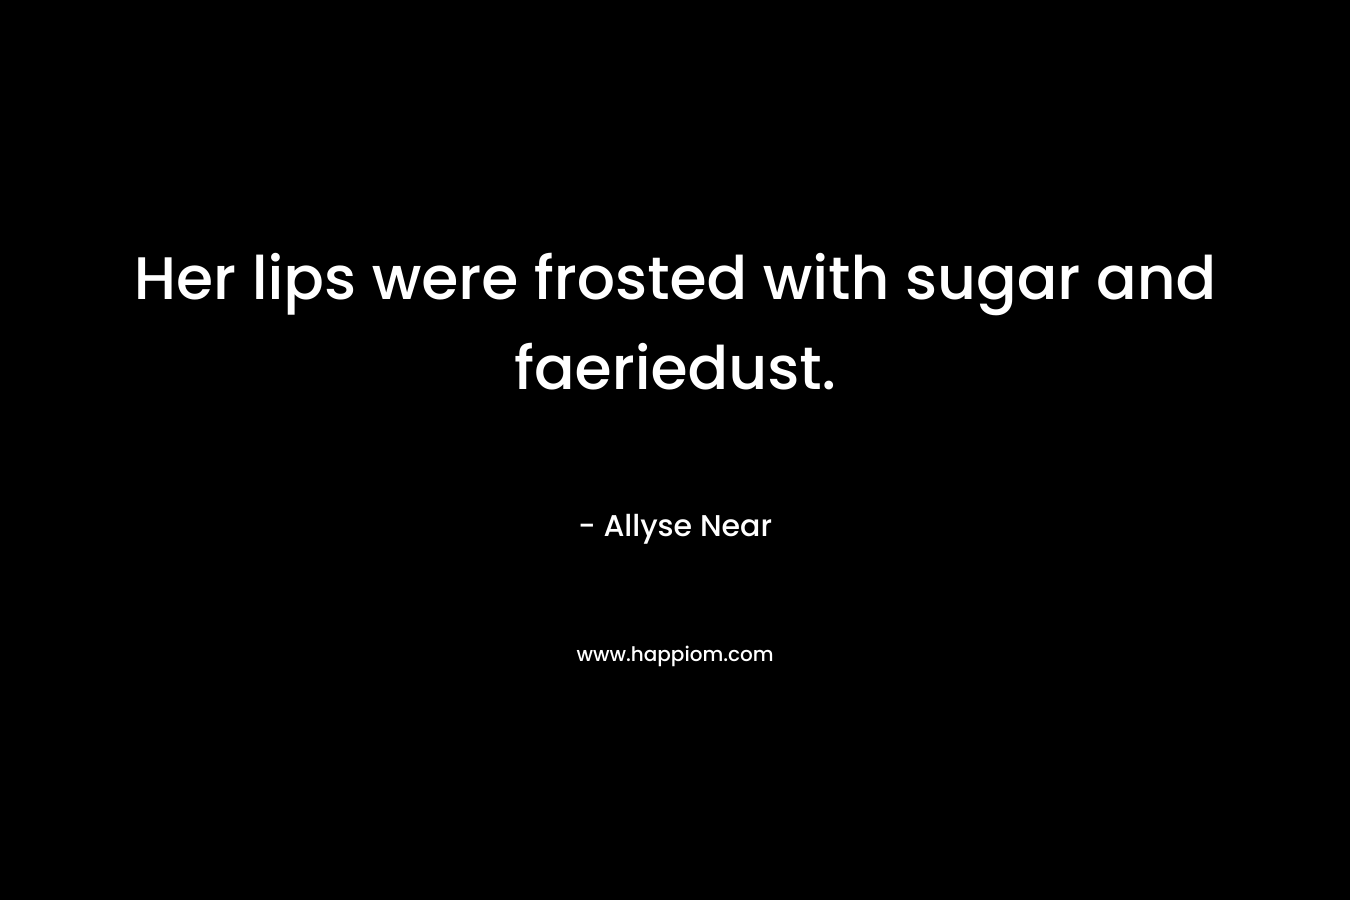 Her lips were frosted with sugar and faeriedust.